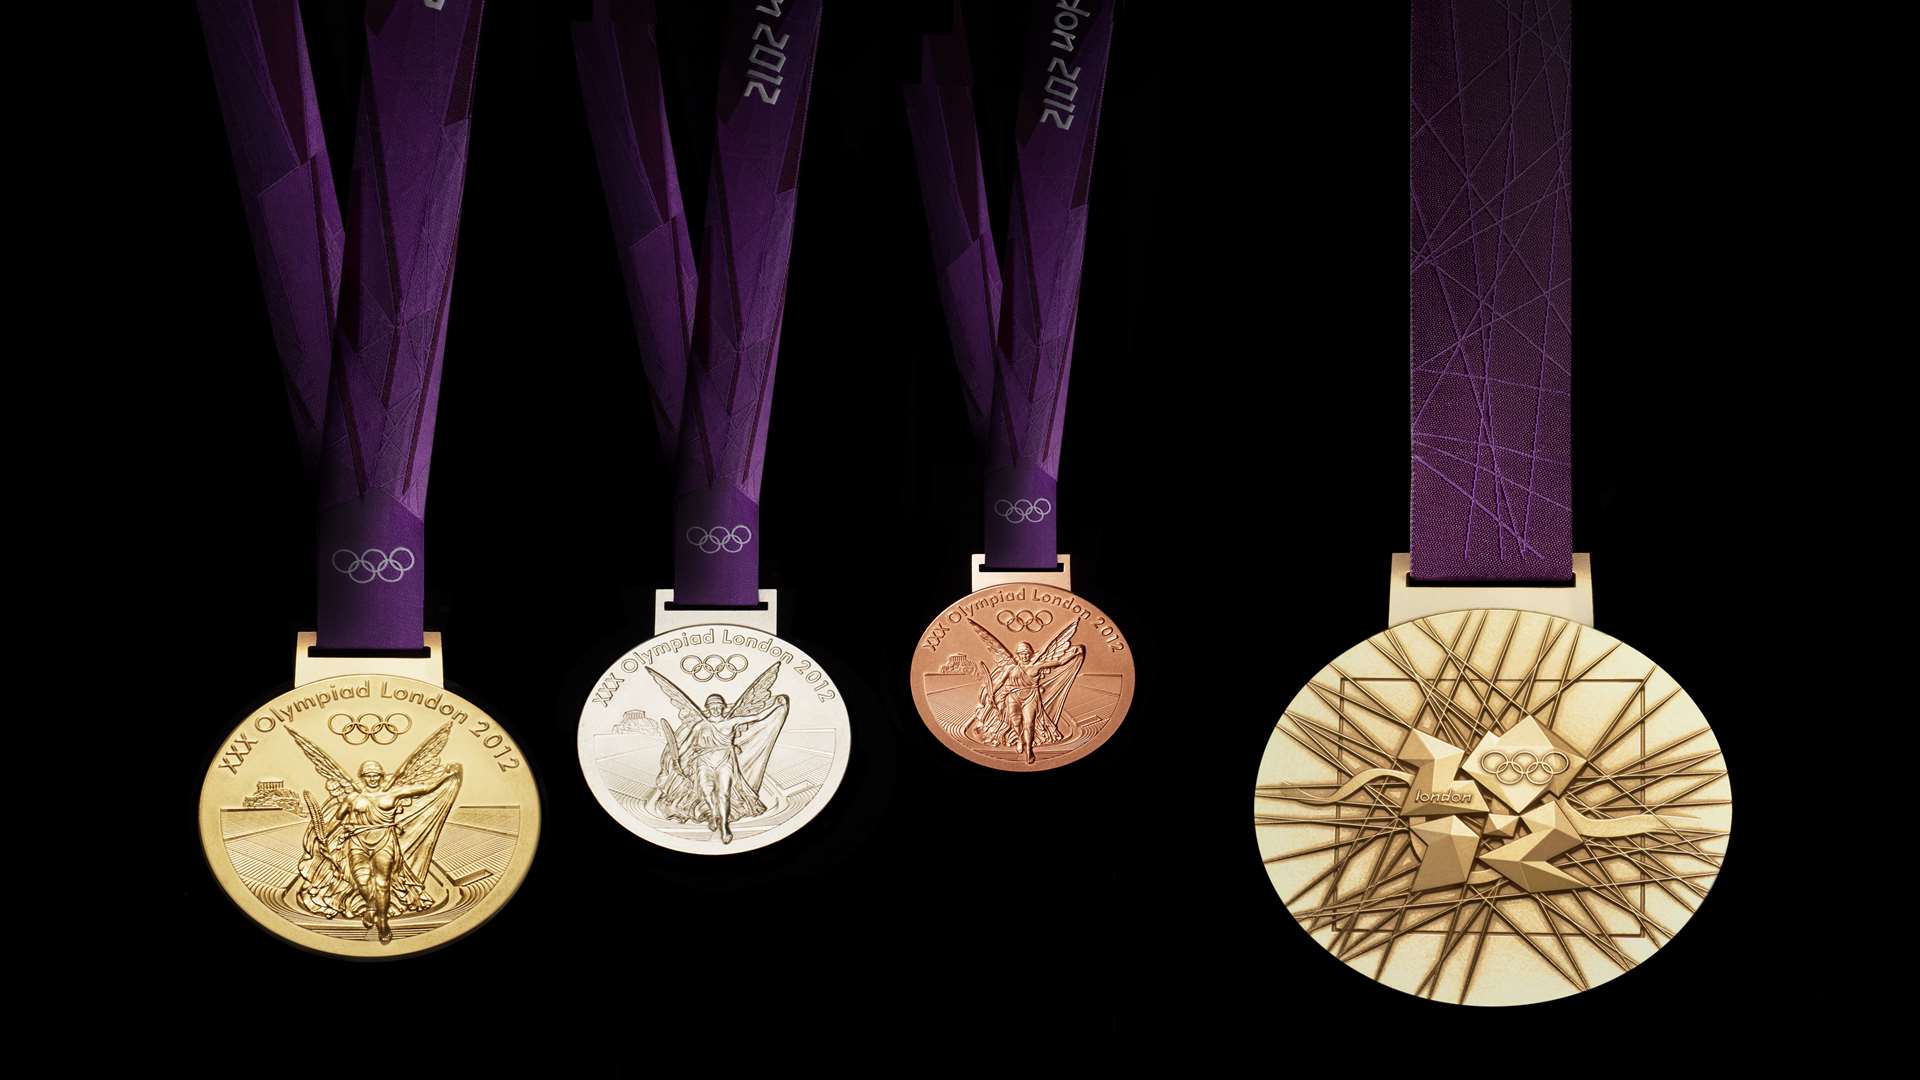 London 2012 medals